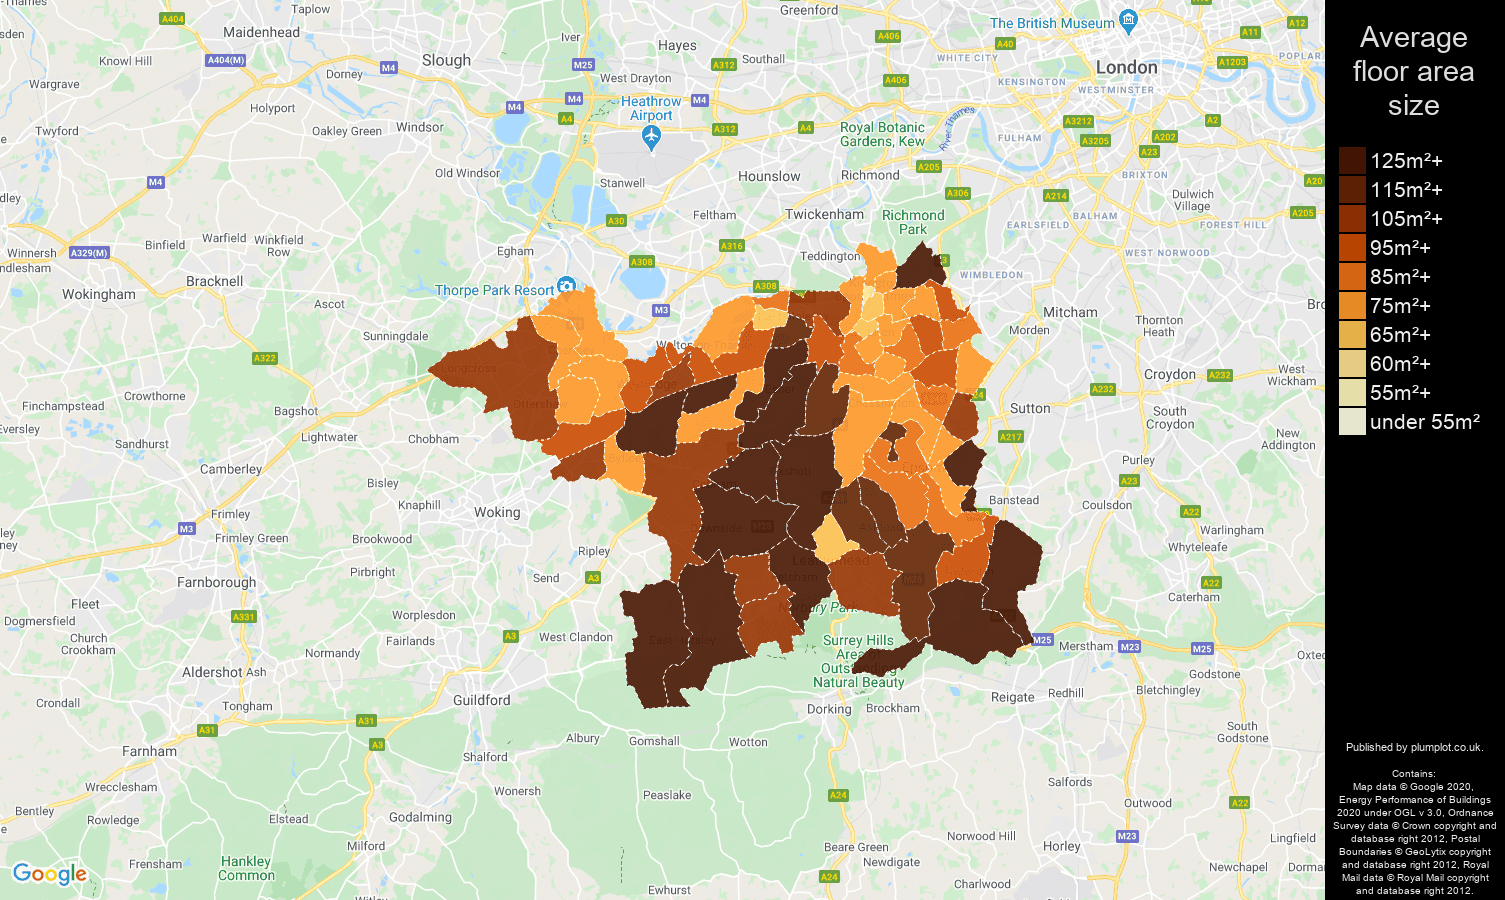 Kingston upon Thames map of average floor area size of properties